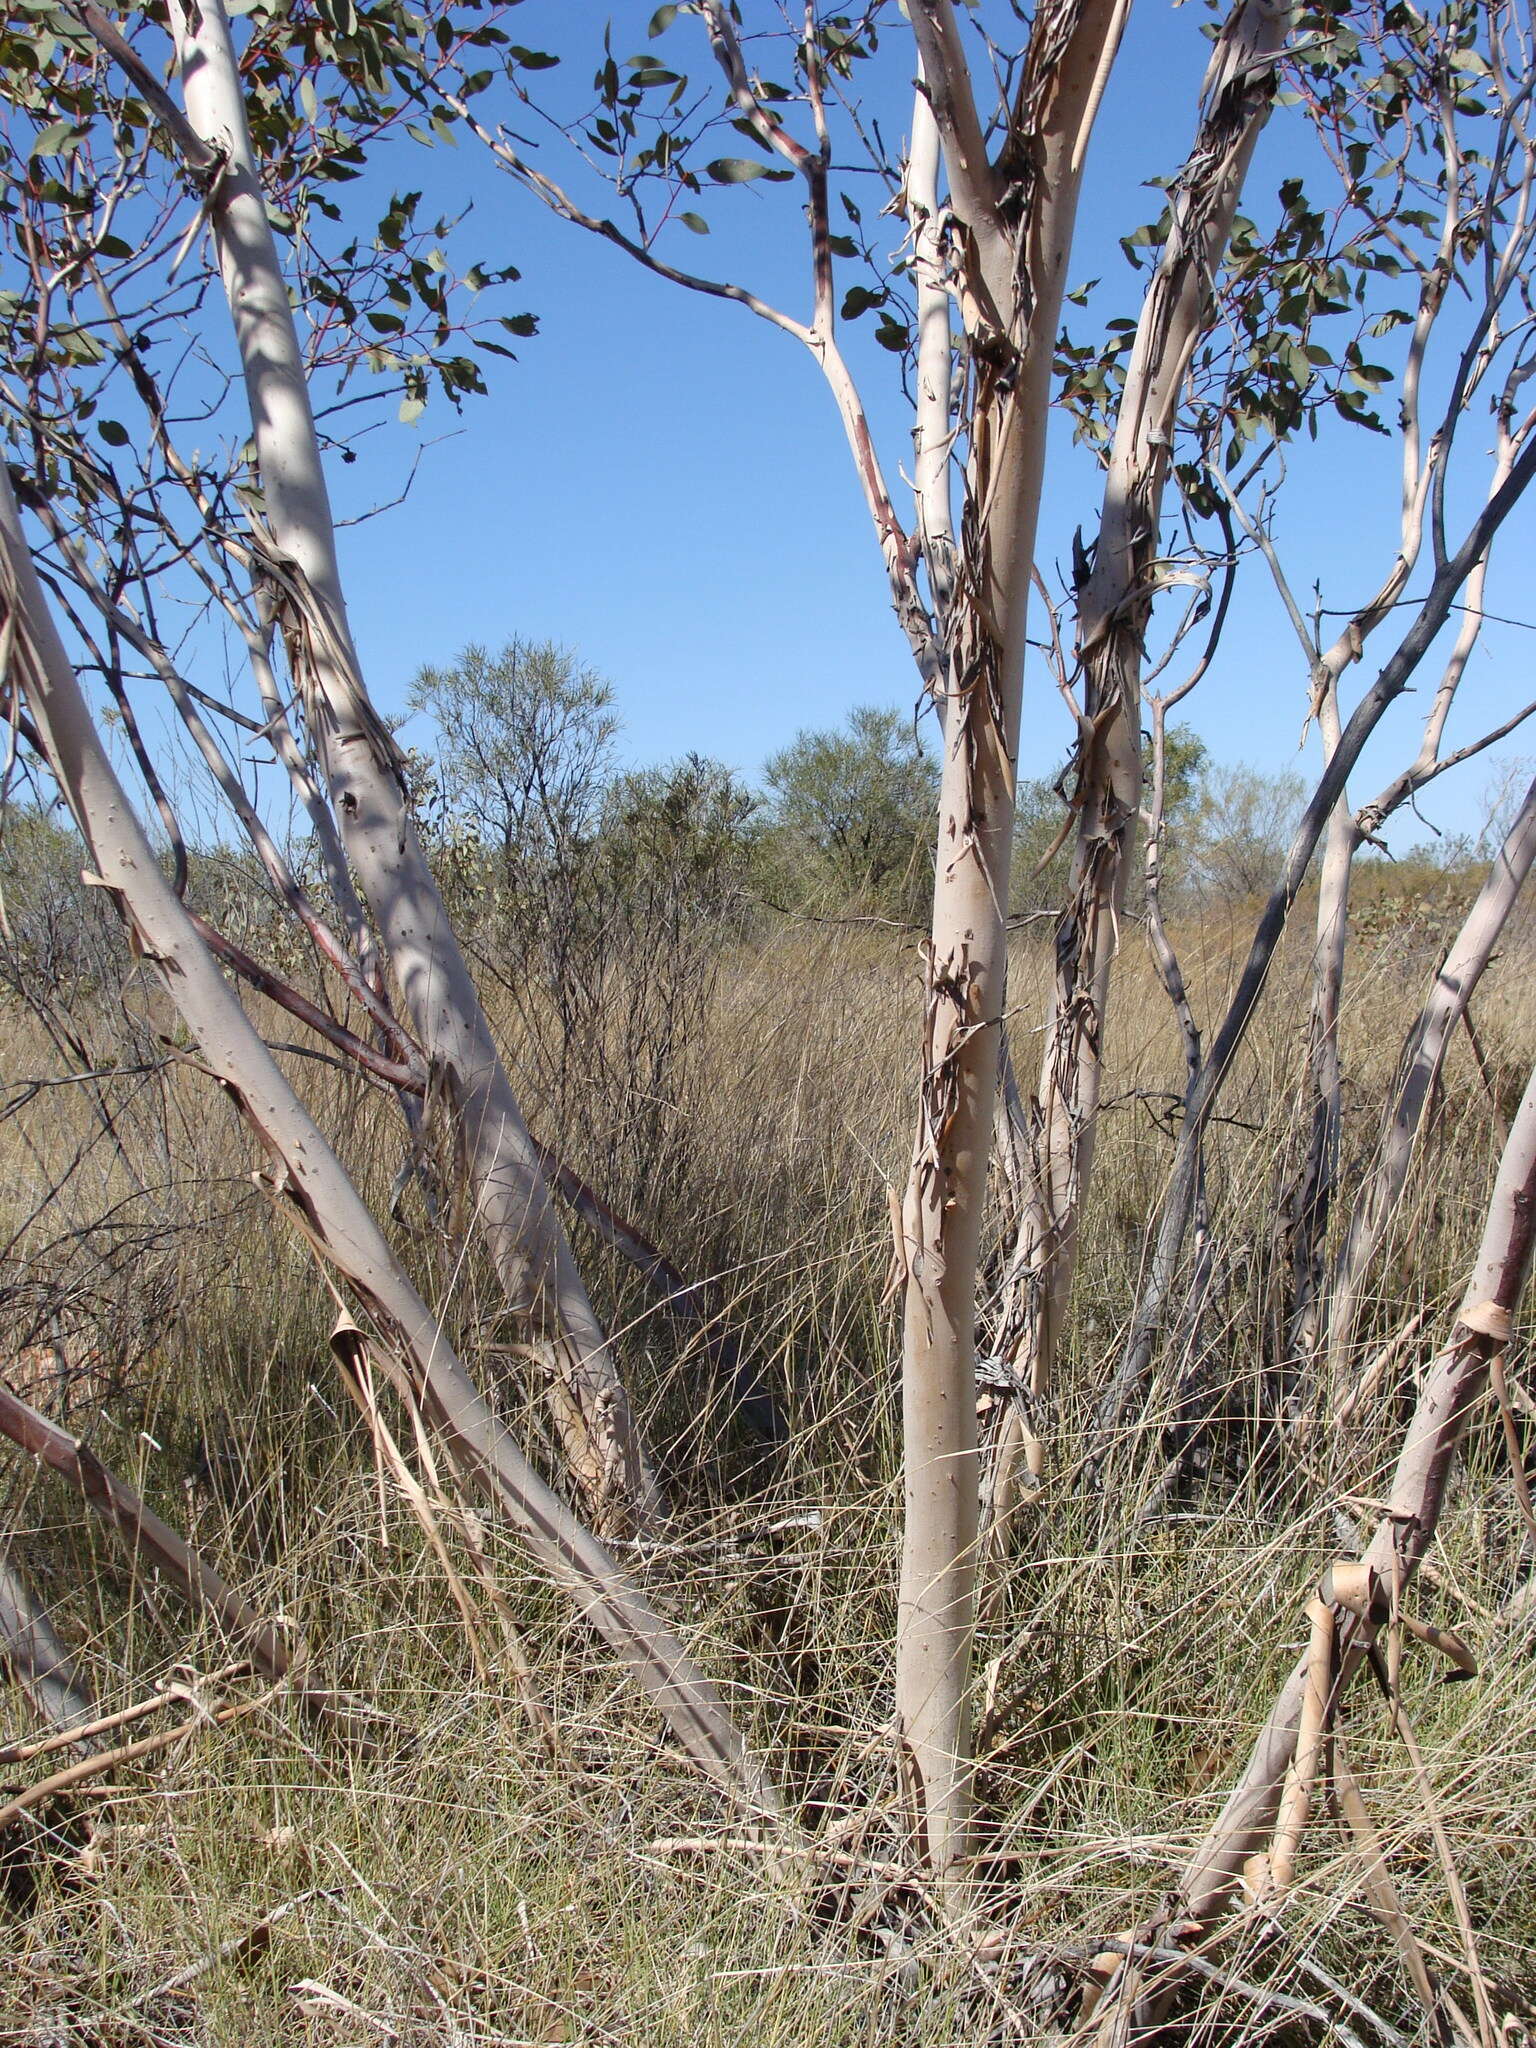 Image of Eucalyptus pachyphylla F. Müll.